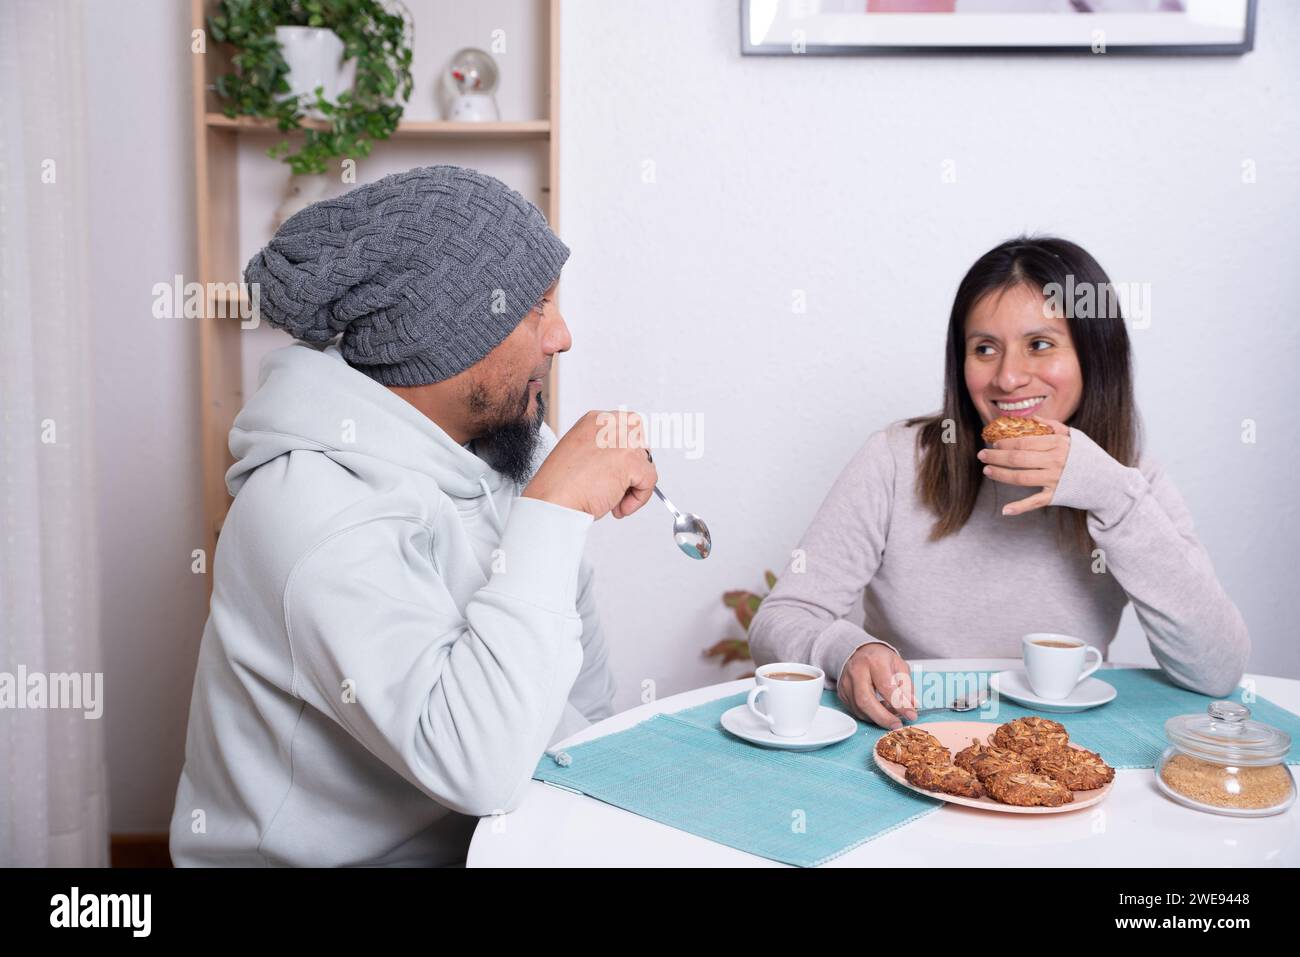 Couple enjoy cookies prepared by themselves at home. Stock Photo